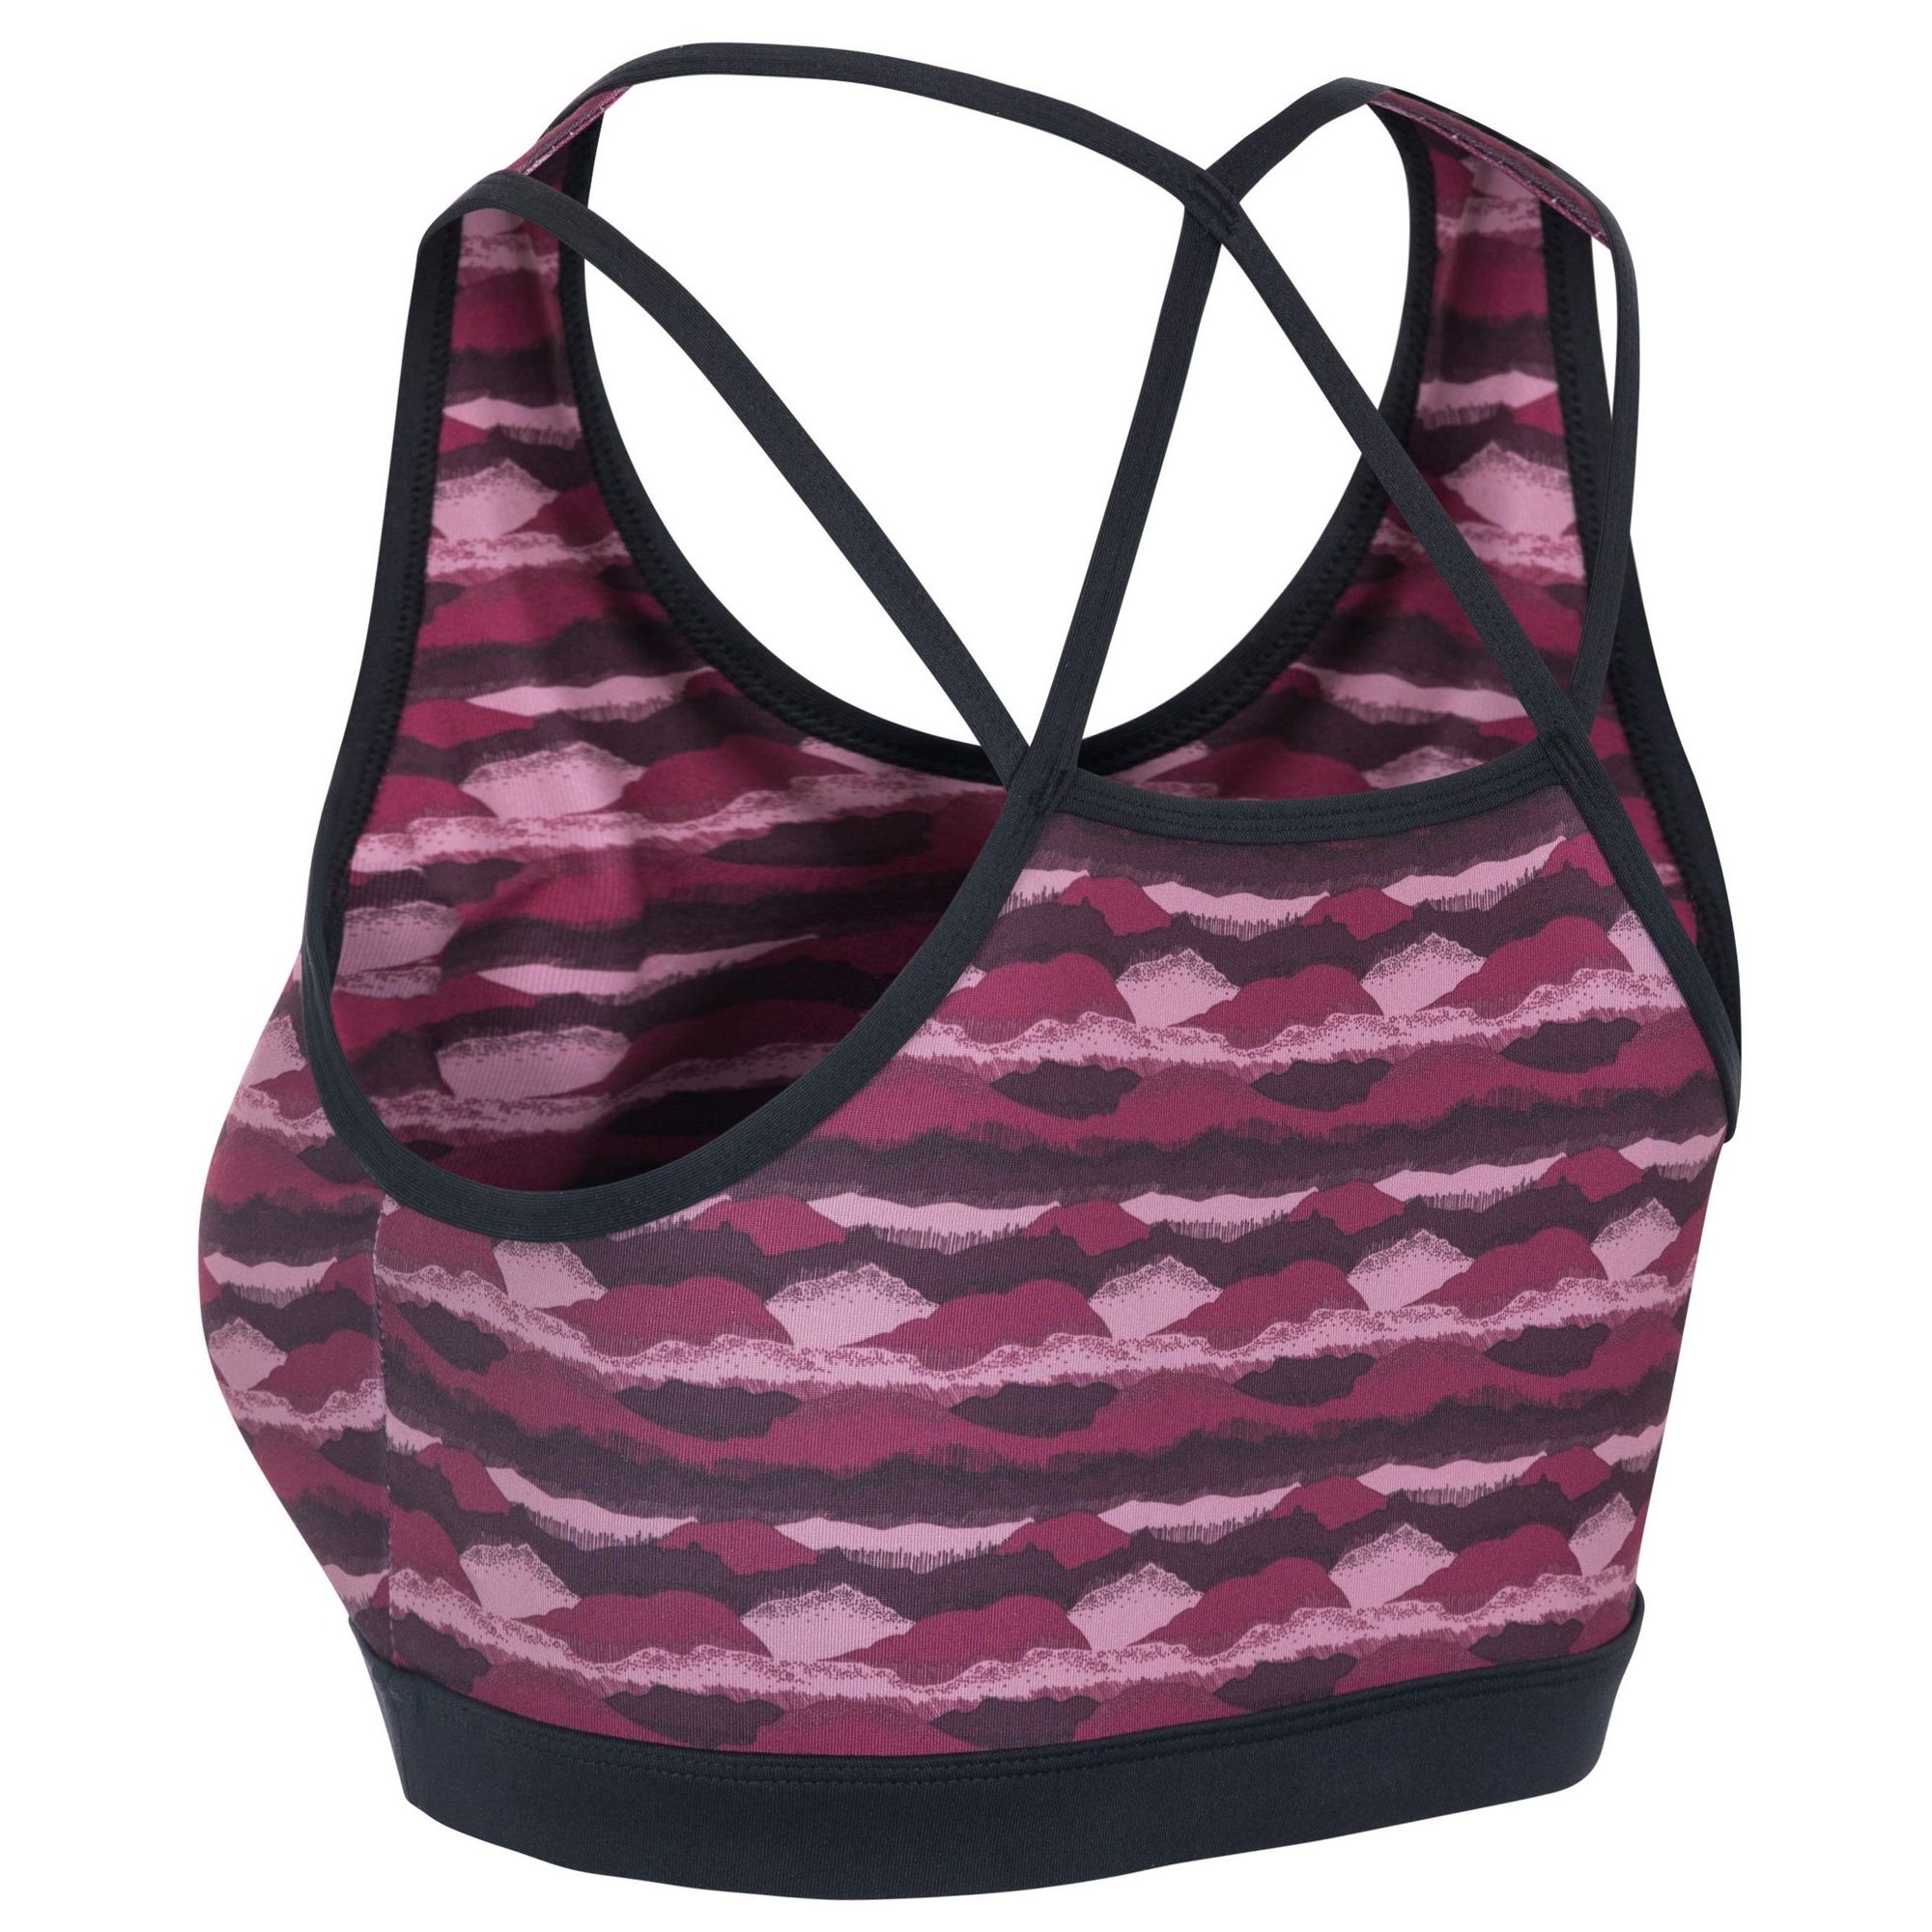 90% Polyester, 10% Elastane. All over print. Supportive fabric. Contrast trims. Reflective printed logos. Wicking. Quick dry. Trespass Womens Chest Sizing (approx): XS/8 - 32in/81cm, S/10 - 34in/86cm, M/12 - 36in/91.4cm, L/14 - 38in/96.5cm, XL/16 - 40in/101.5cm, XXL/18 - 42in/106.5cm.